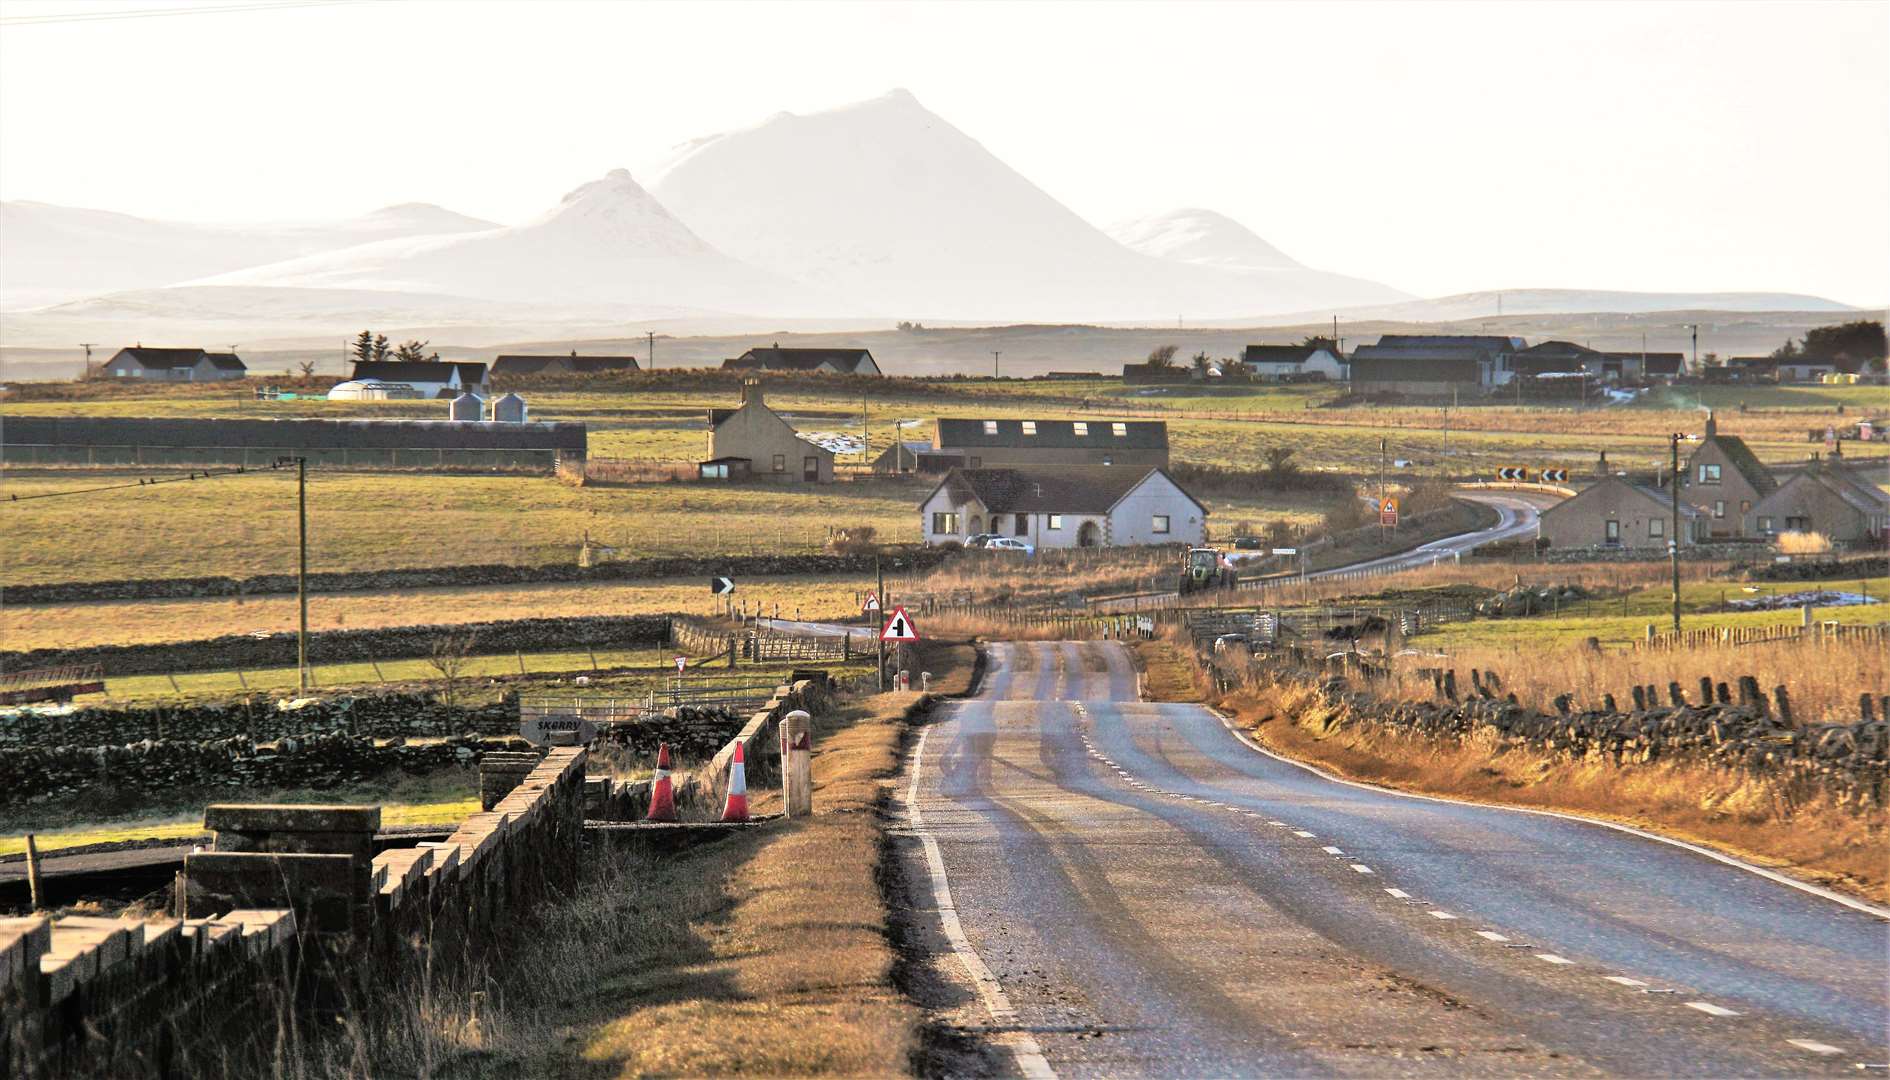 View towards the Scaraben hills from near Occumster on the NC500 route. Picture: DGS